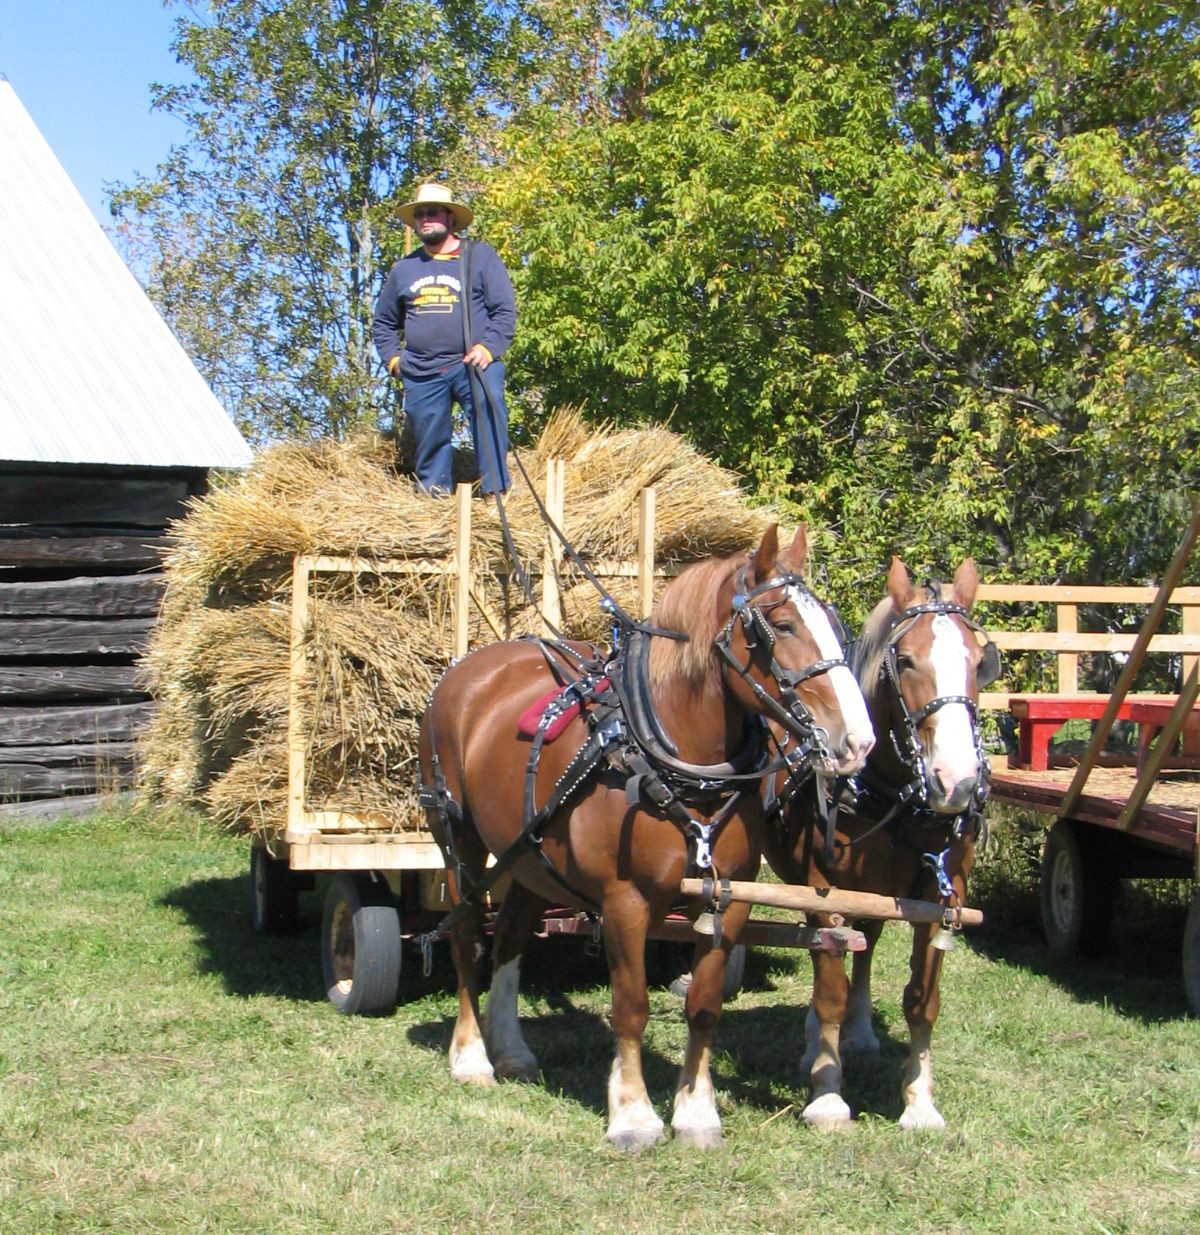 Roosters, Super Zukes, and Munro & McIntosh Buggies at the 19th Annual Harvest Fall Festival des récoltes